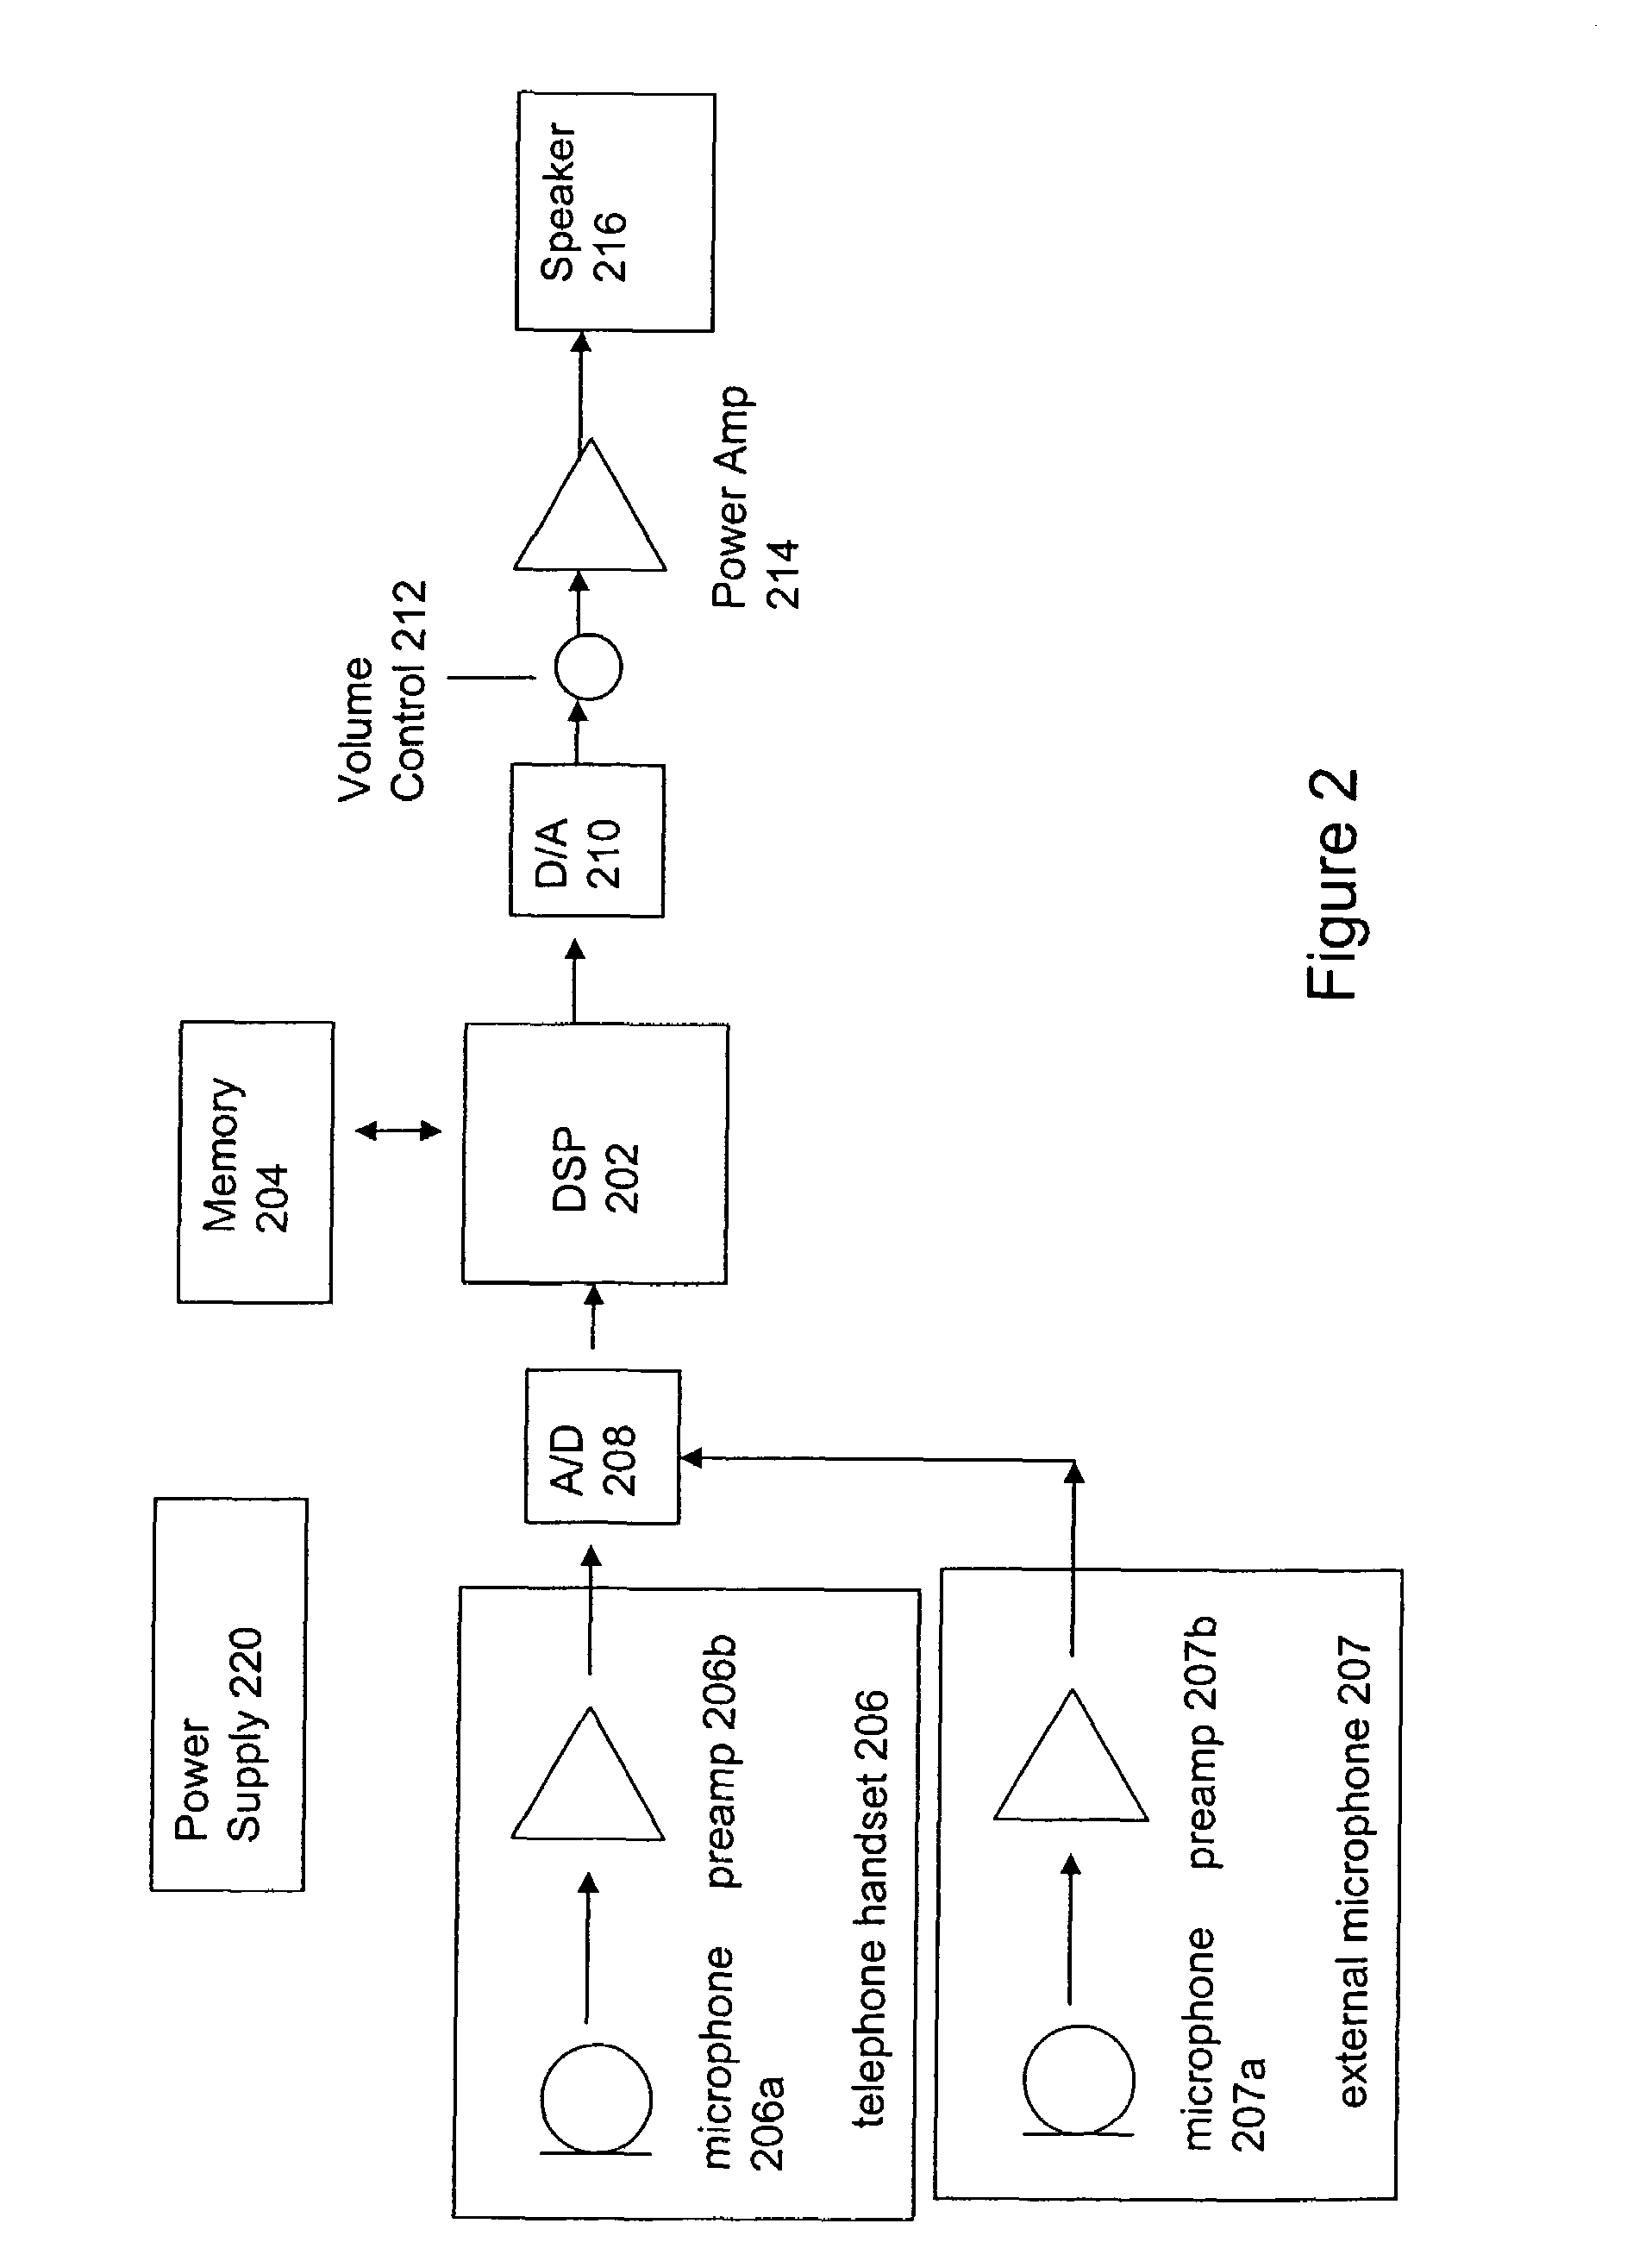 Method and apparatus of overlapping and summing speech for an output that disrupts speech